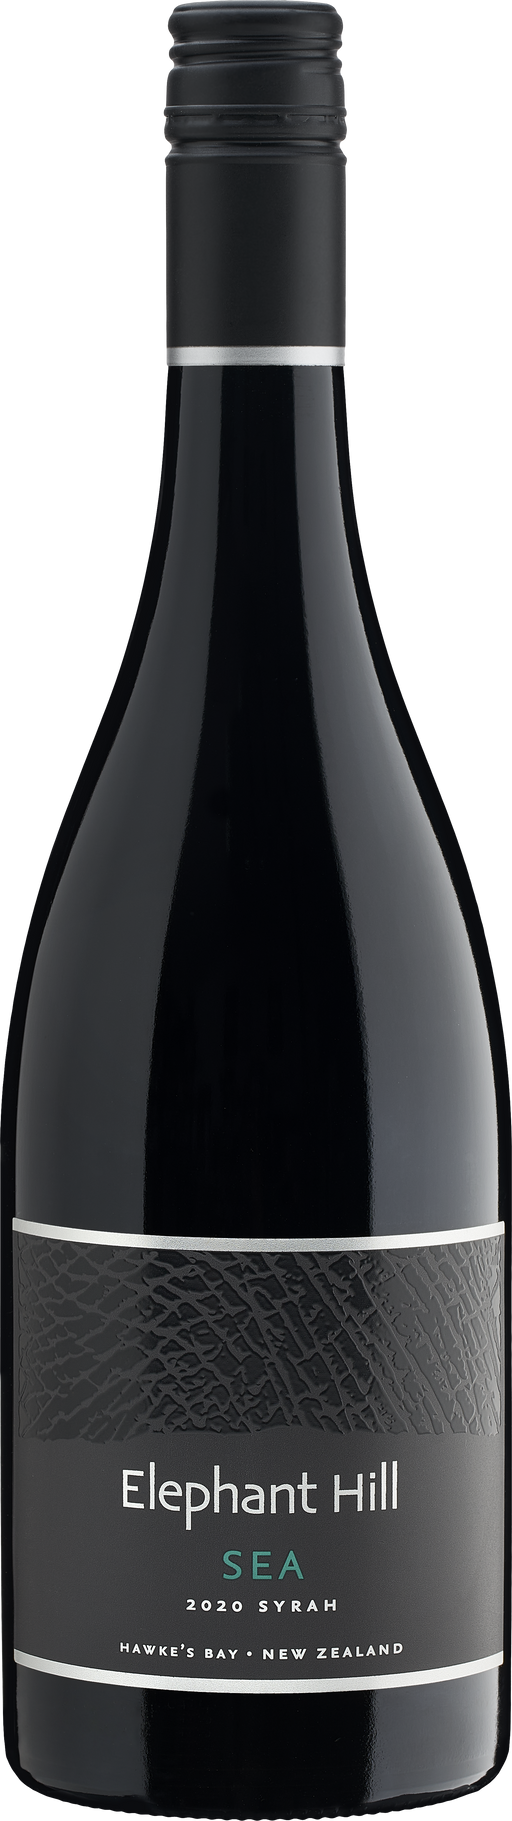 2020 Elephant Hill SEA Syrah <br>*NEW RELEASE*<br>Limited to 6 bottles per person